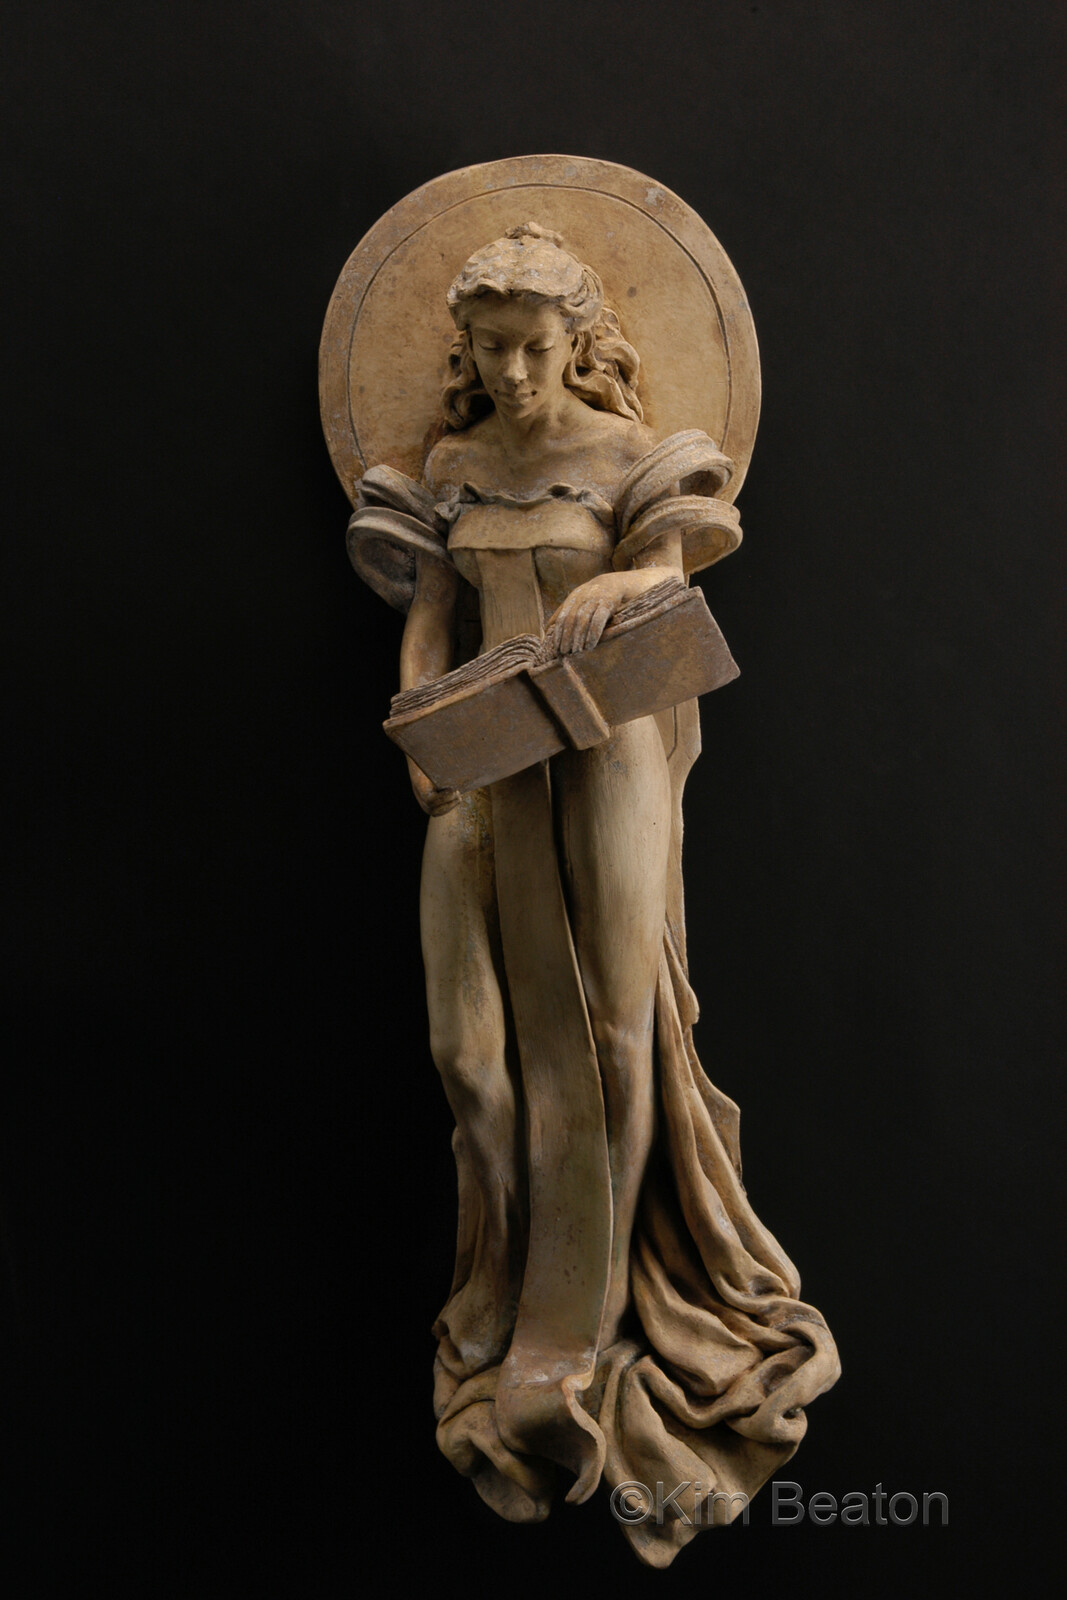 Ceramic sculpture of the famous genius, mathematician, philosopher and astronomer in late 4th-century Roman Egypt. 